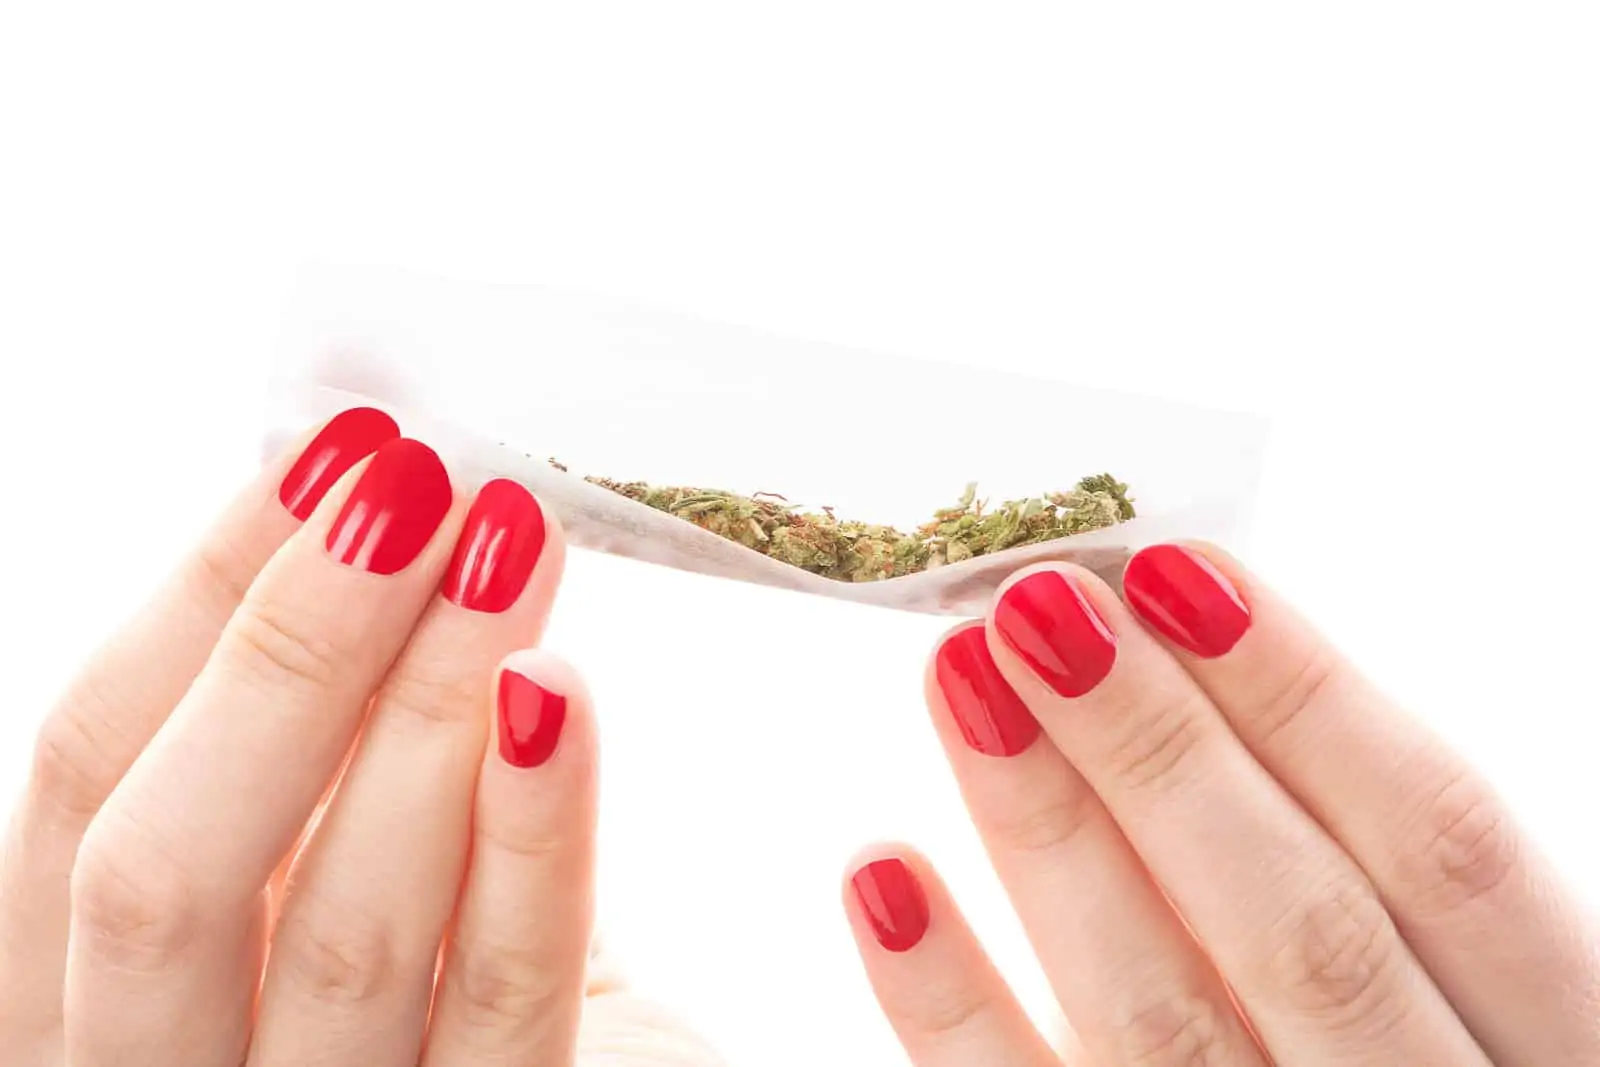 Female Cannabis Influencers Who Have Impacted The Industry